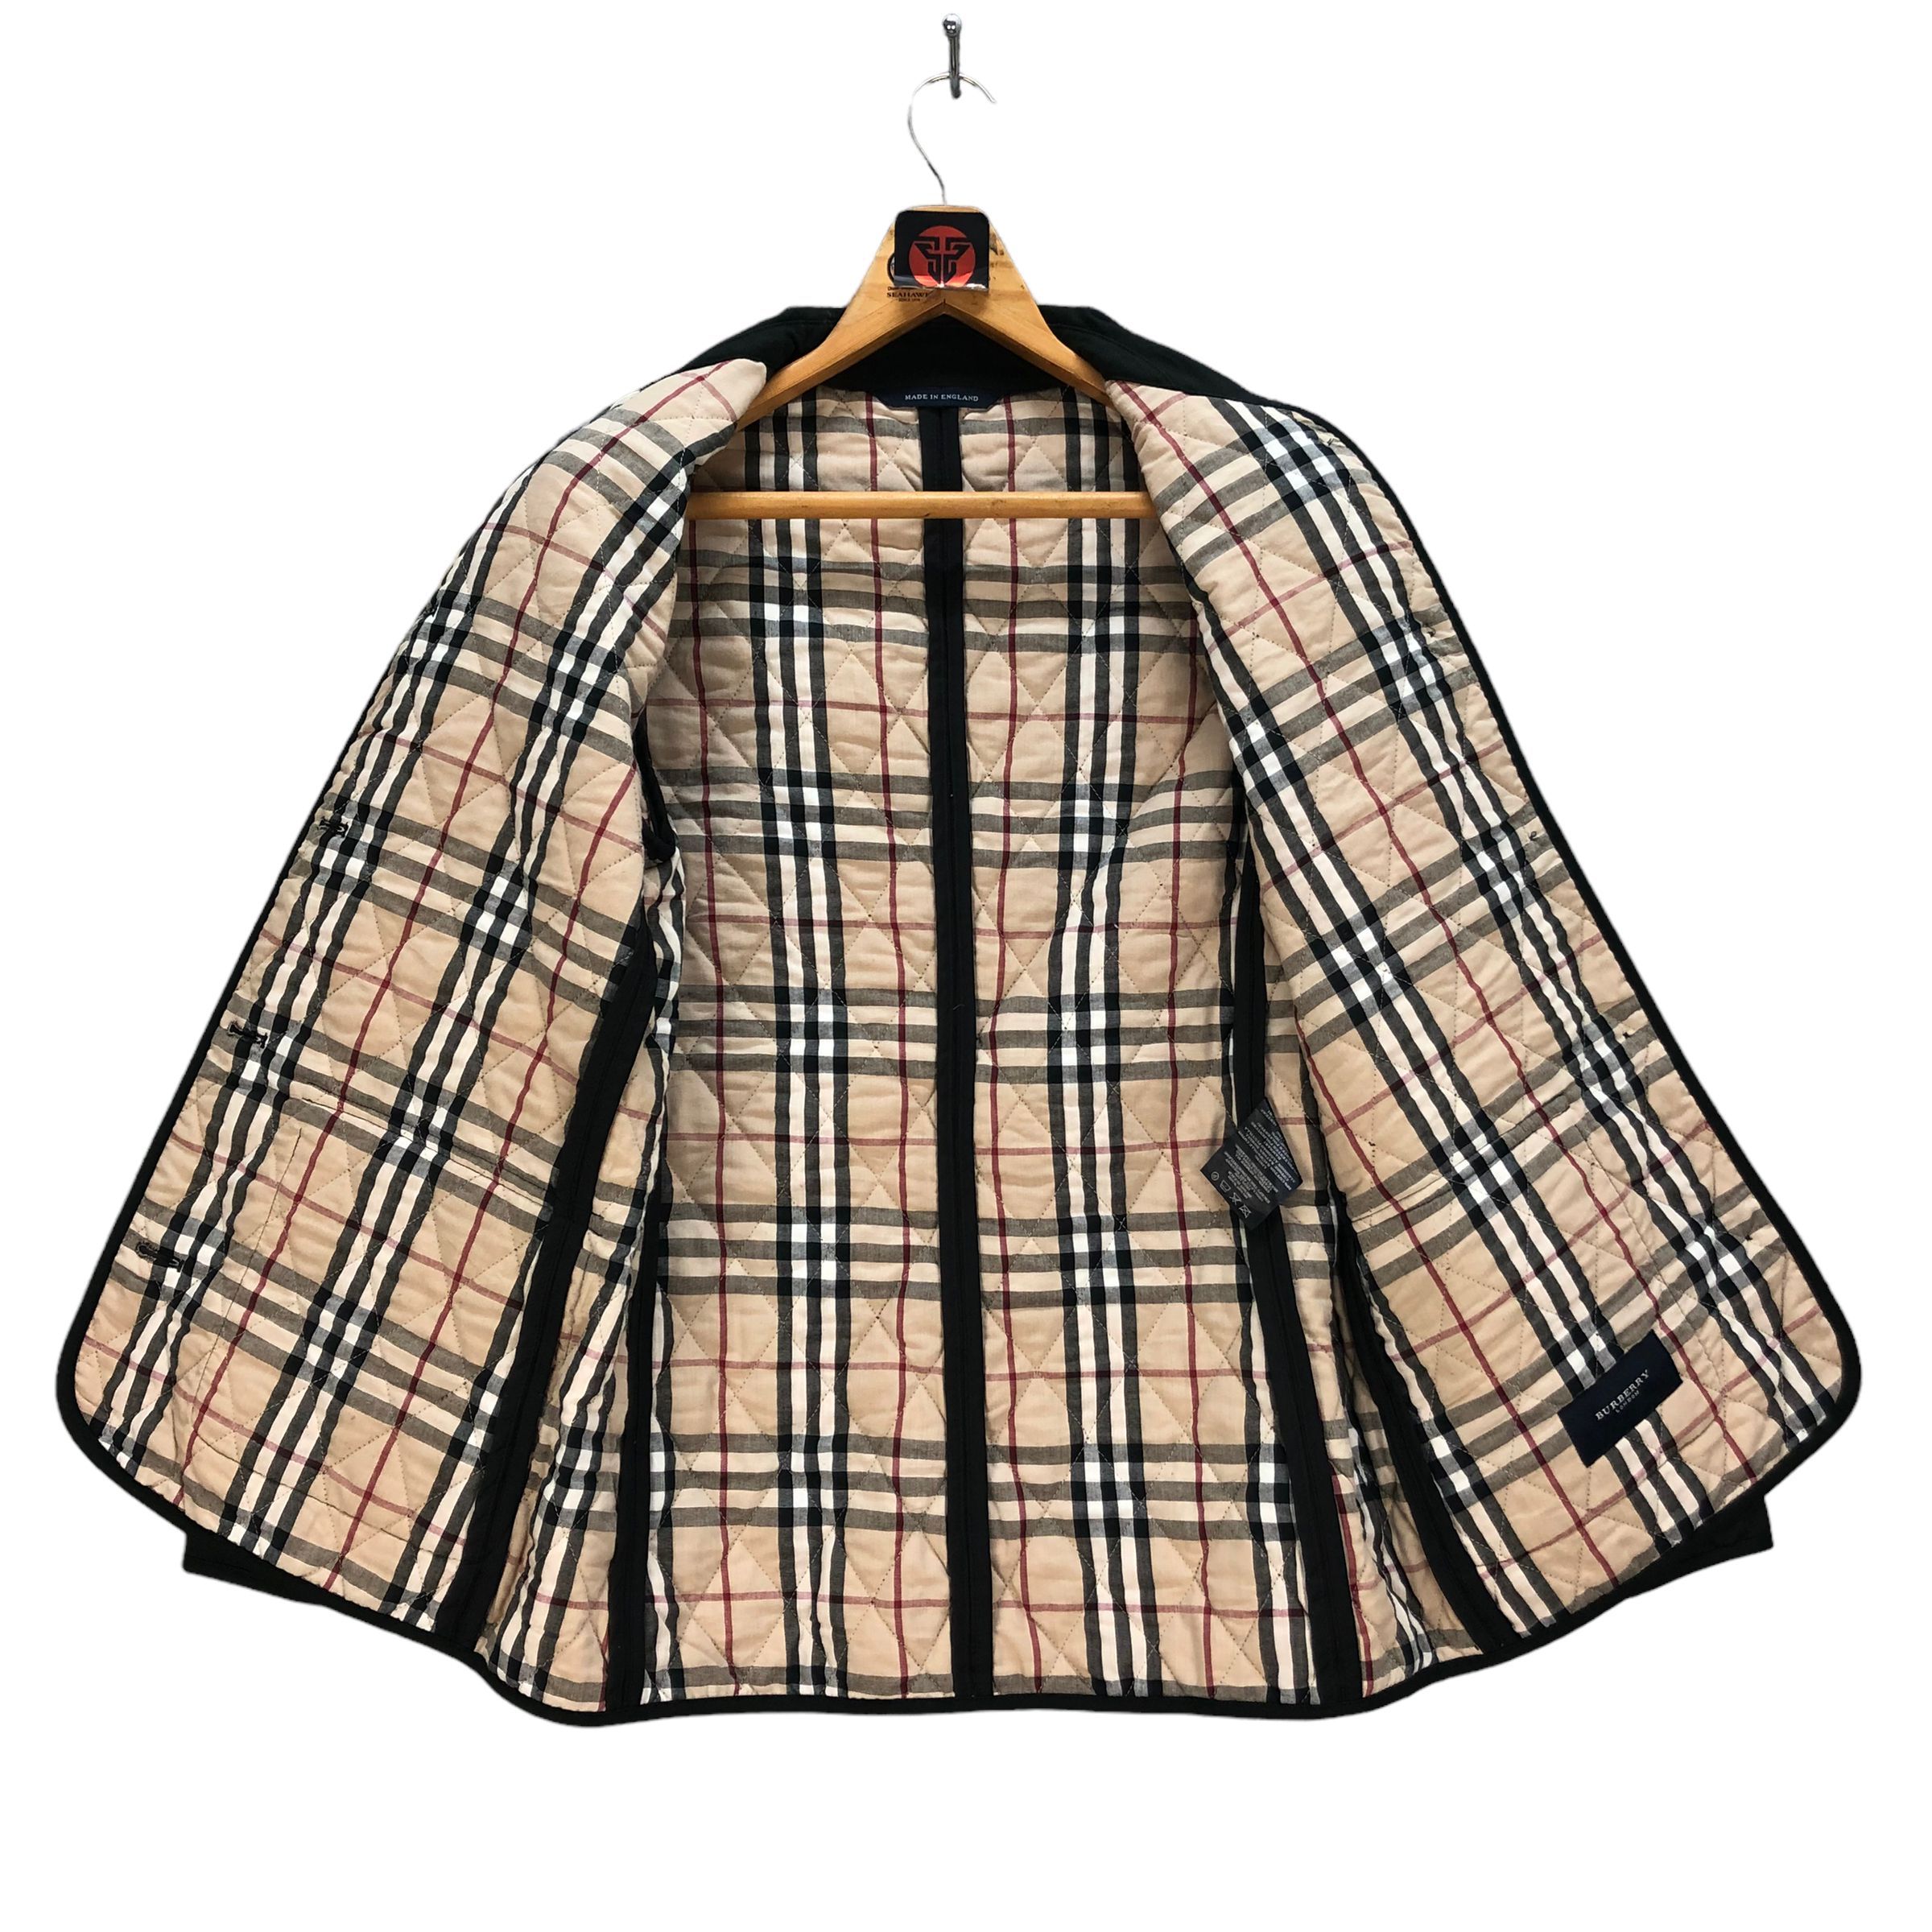 BURBERRY LONDON NOVA CHECK QUILTED JACKET #7238-120 - 6